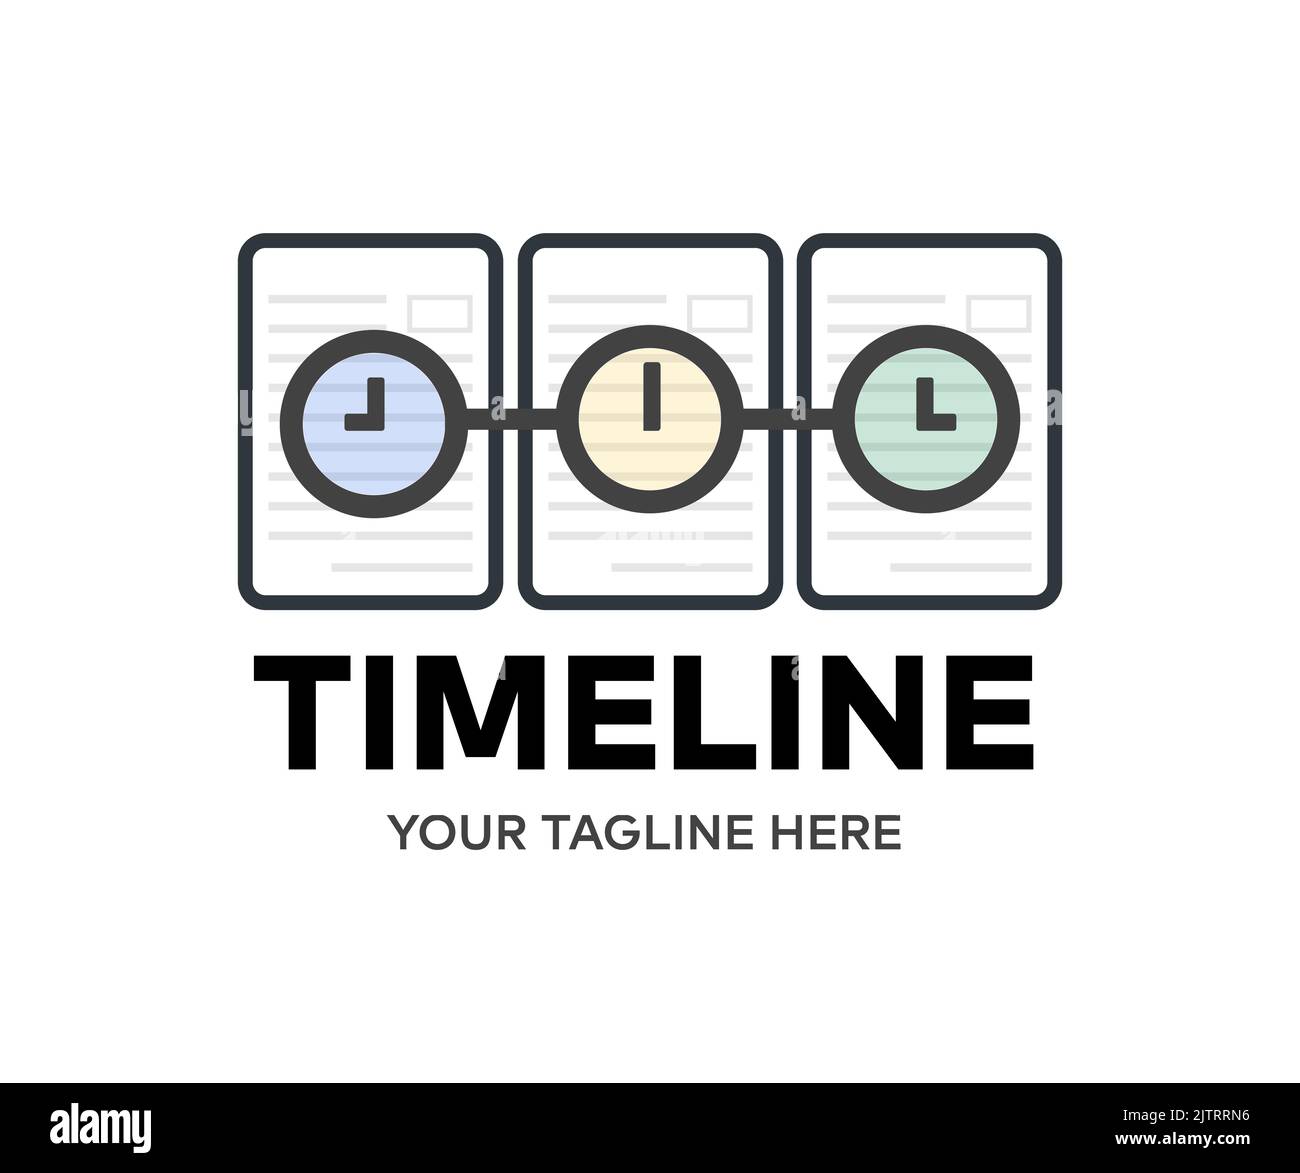 Timeline and schedule isolated logo design. Infographic elements data visualization, business data visualization, management strategy, analysis. Stock Vector